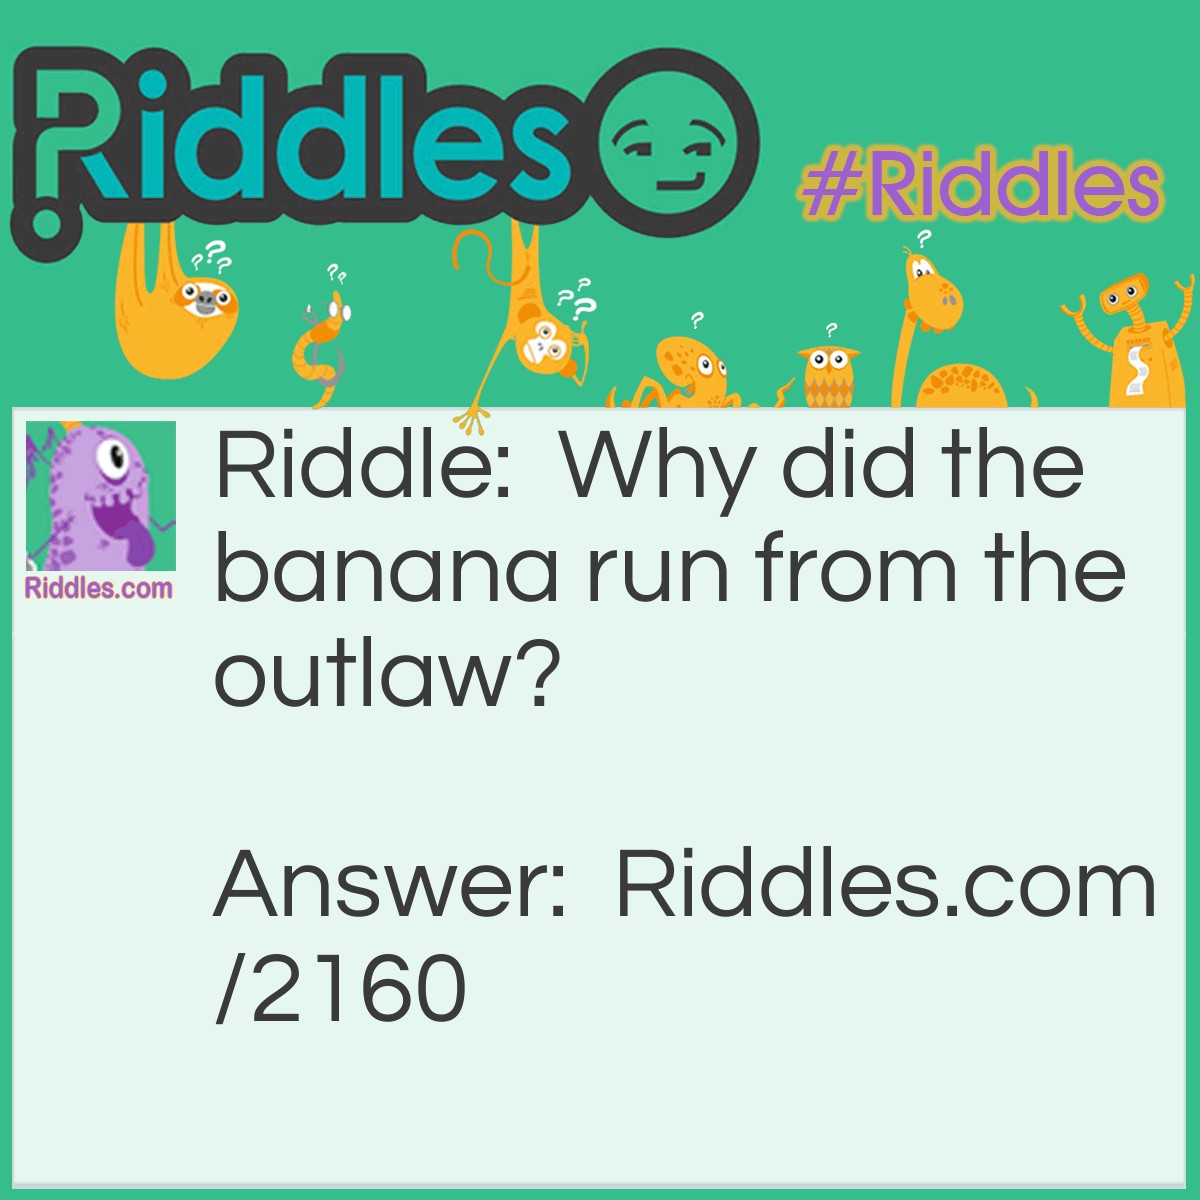 Riddle: Why did the banana run from the outlaw? Answer: Because it was yellow.